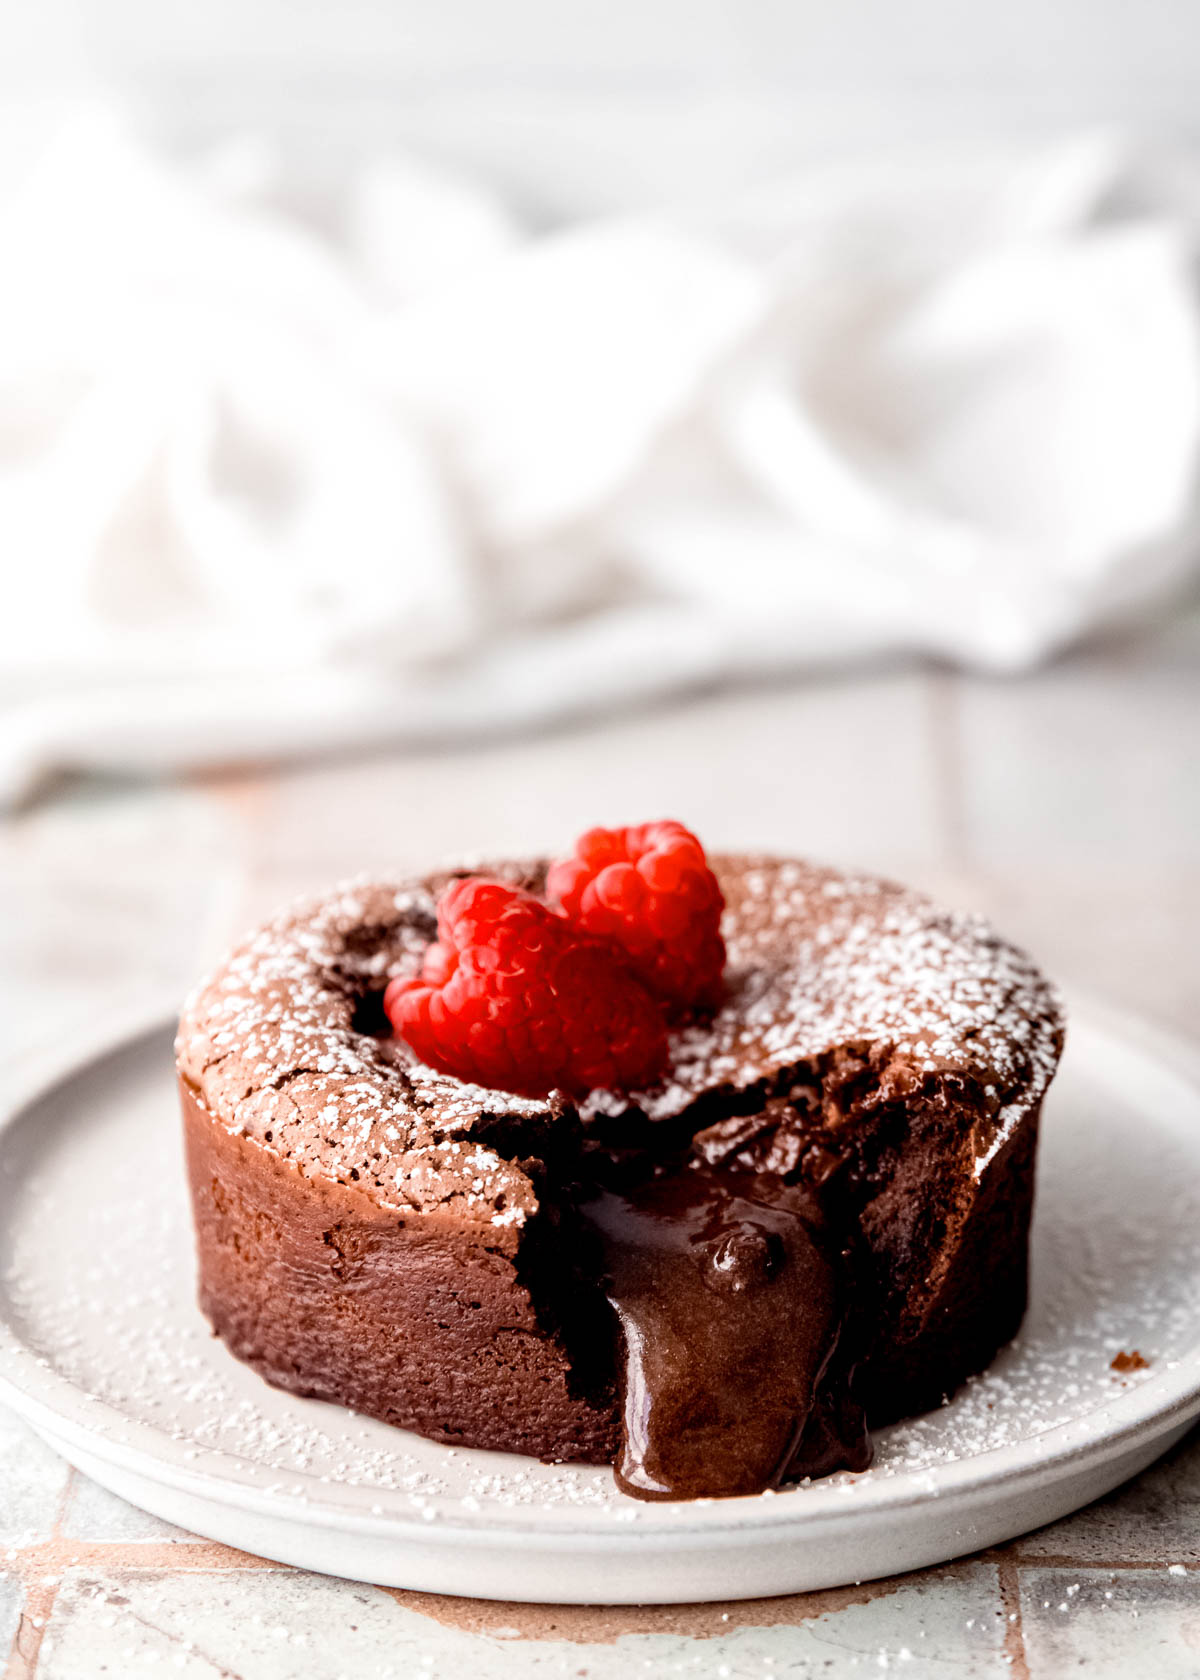 This easy Chocolate Lava Cake is the best dessert for two! This gluten-free chocolate cake has a gooey, melted center sure to make a great impression.